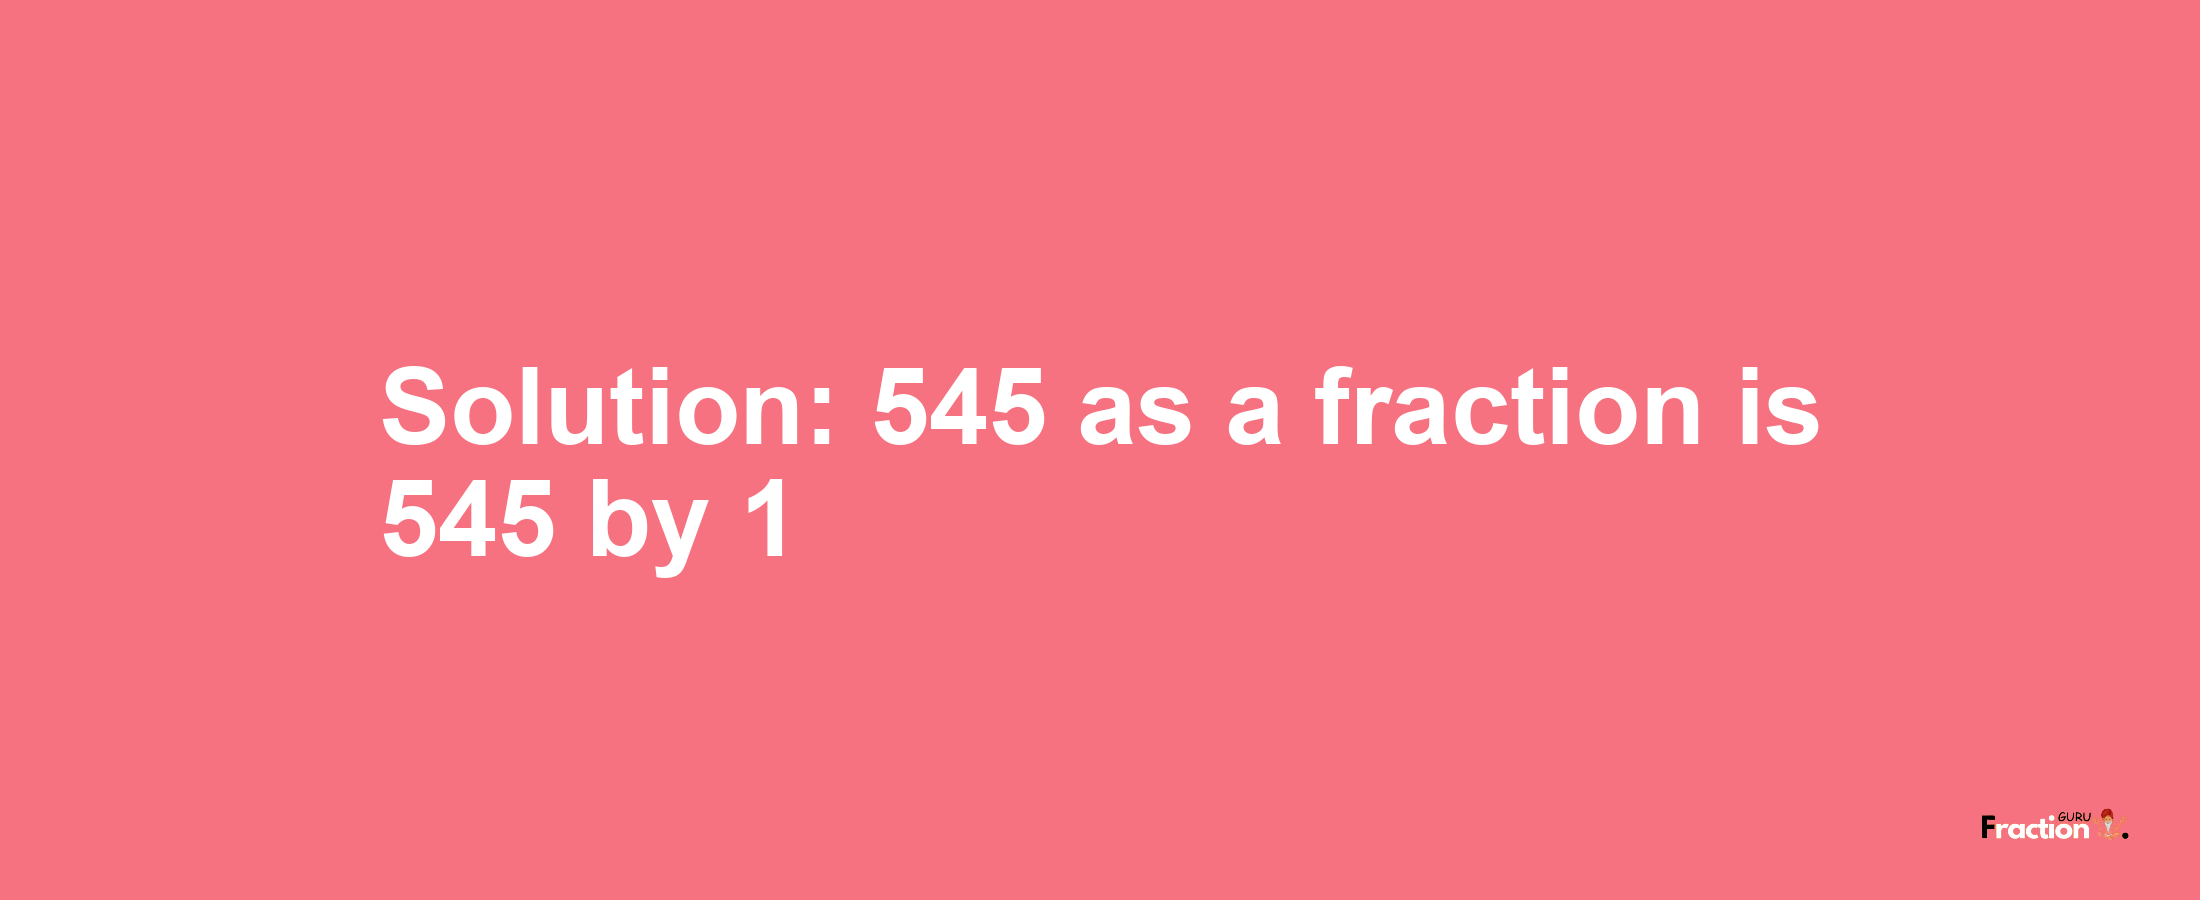 Solution:545 as a fraction is 545/1